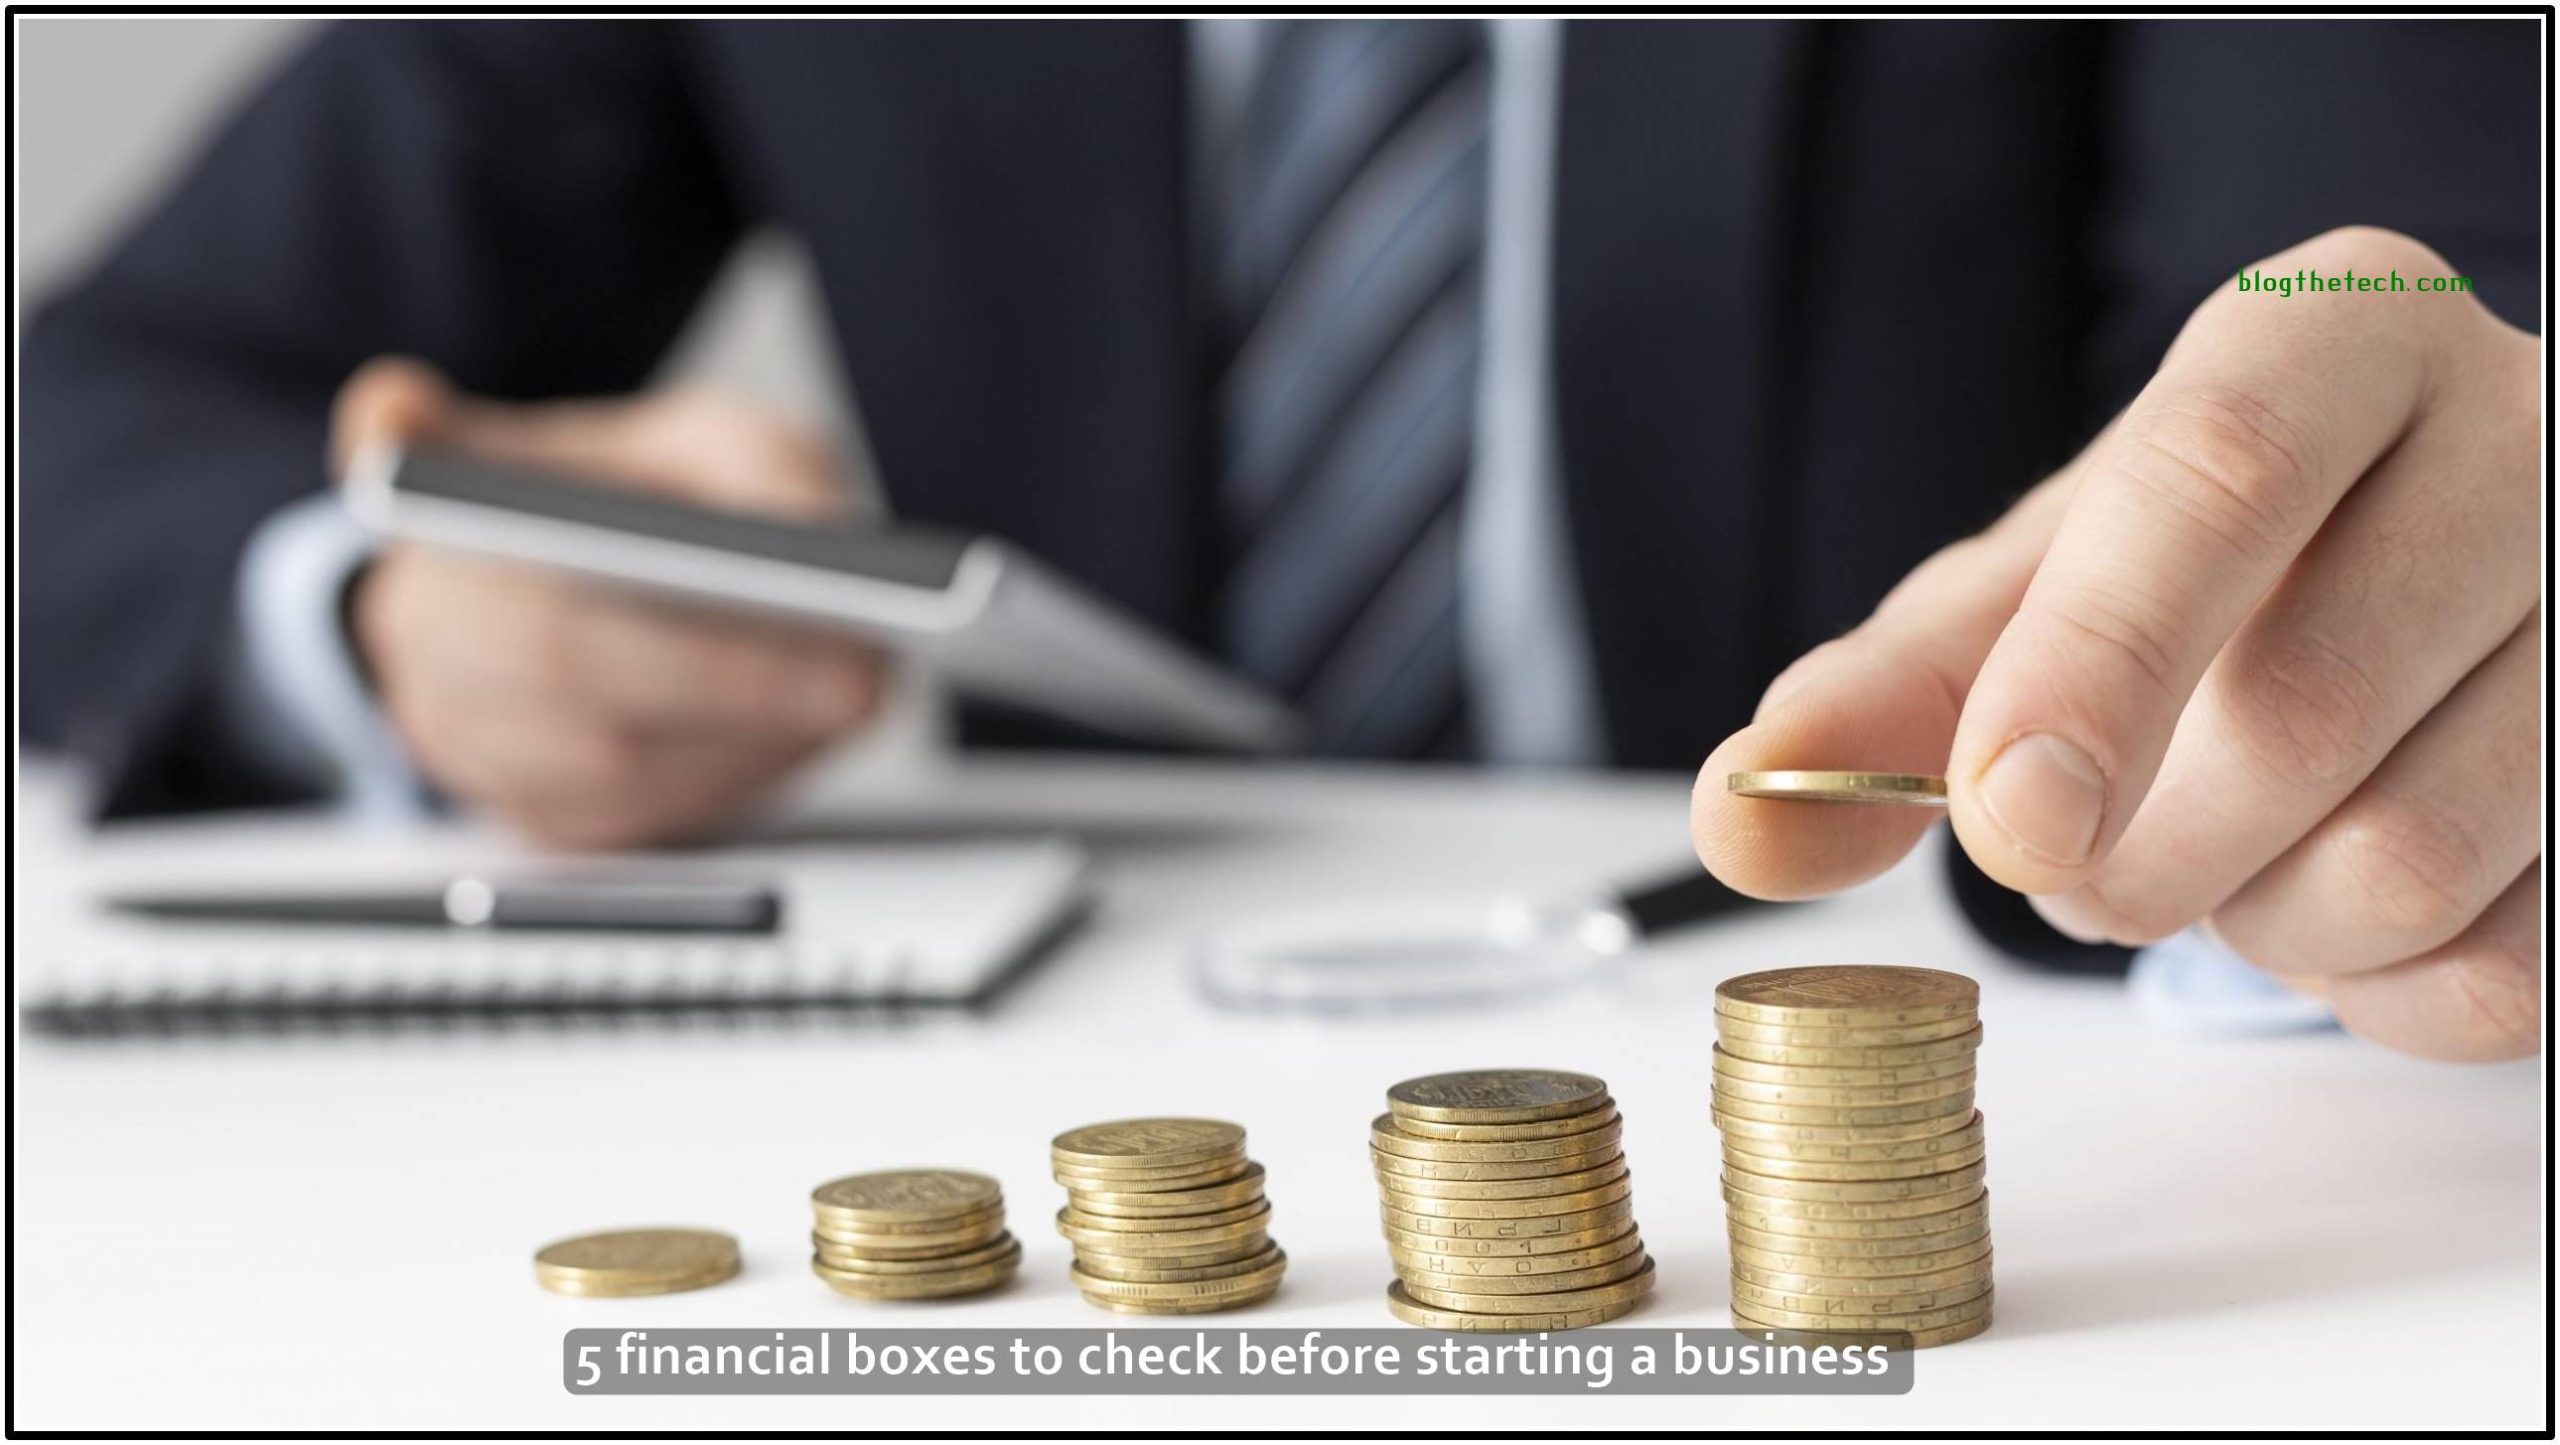 5 financial boxes to check before starting a business